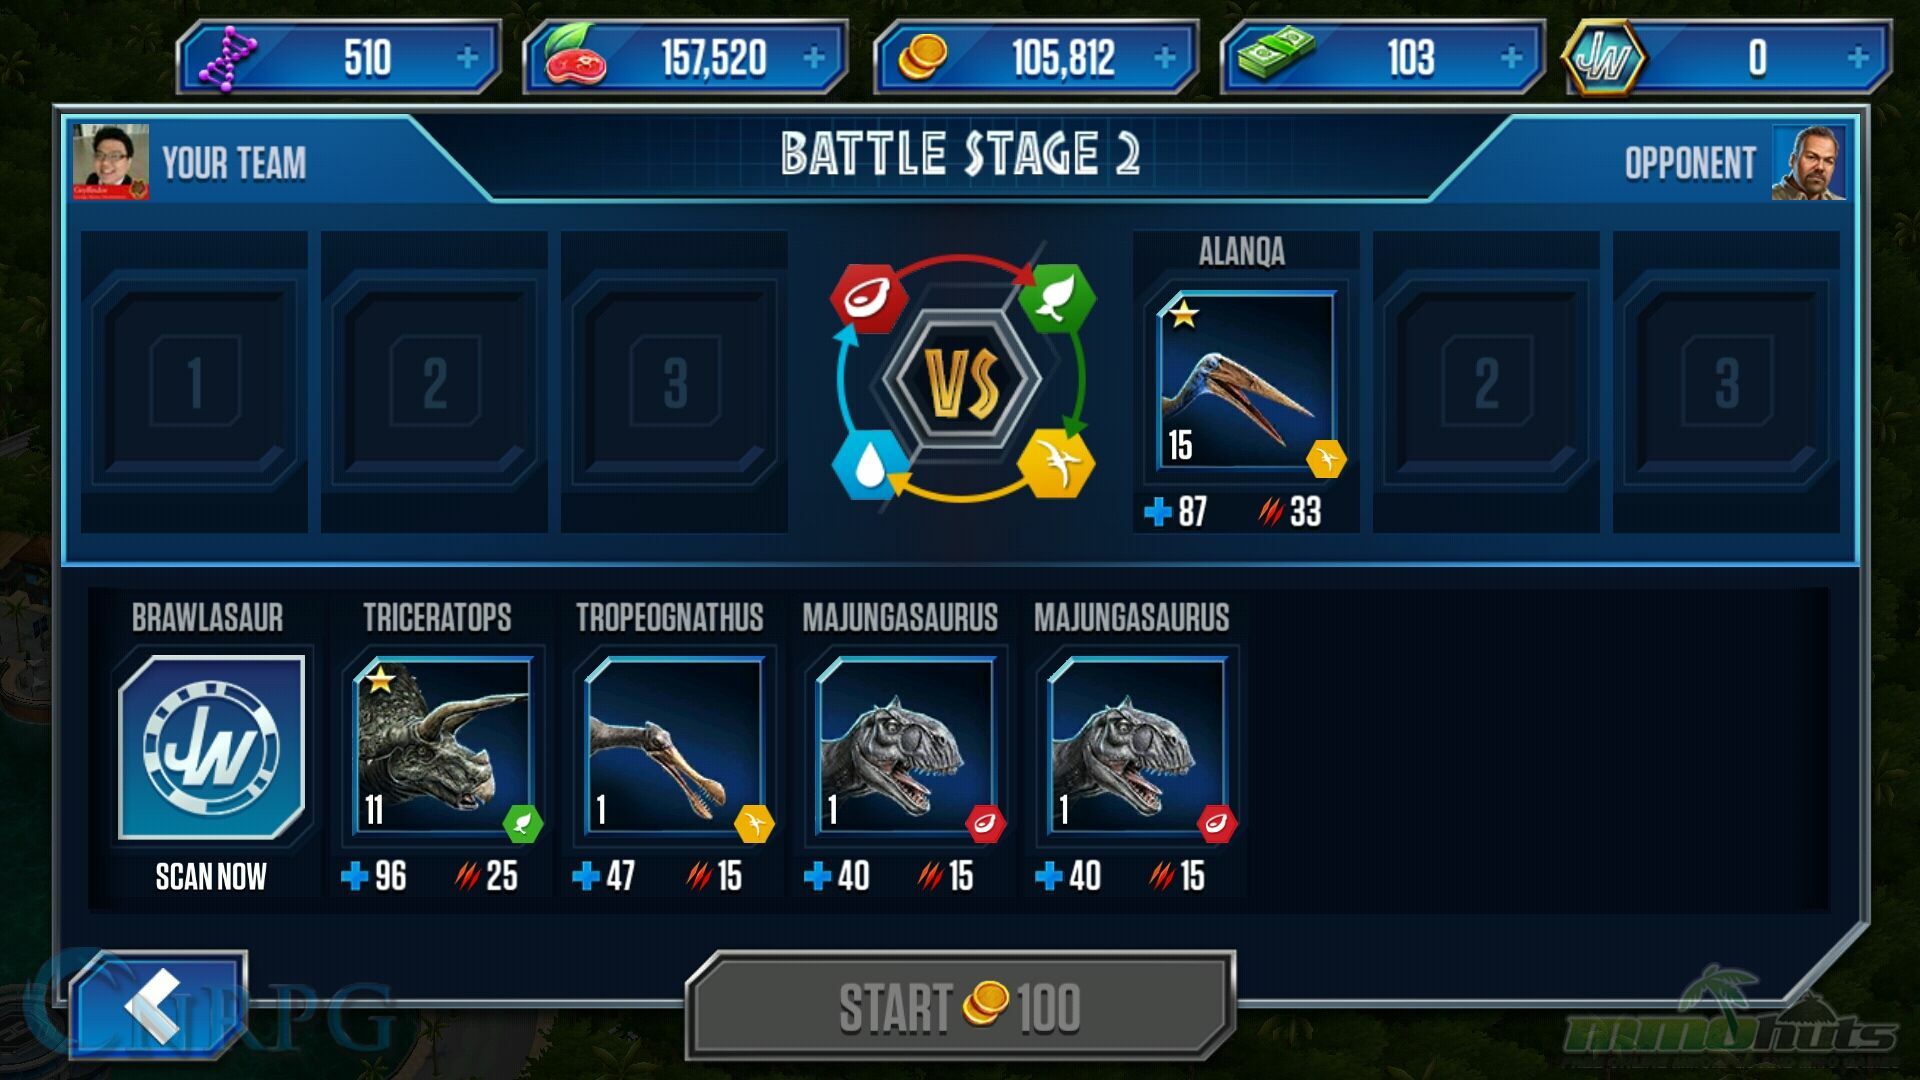 Jurassic World The Mobile Game Review